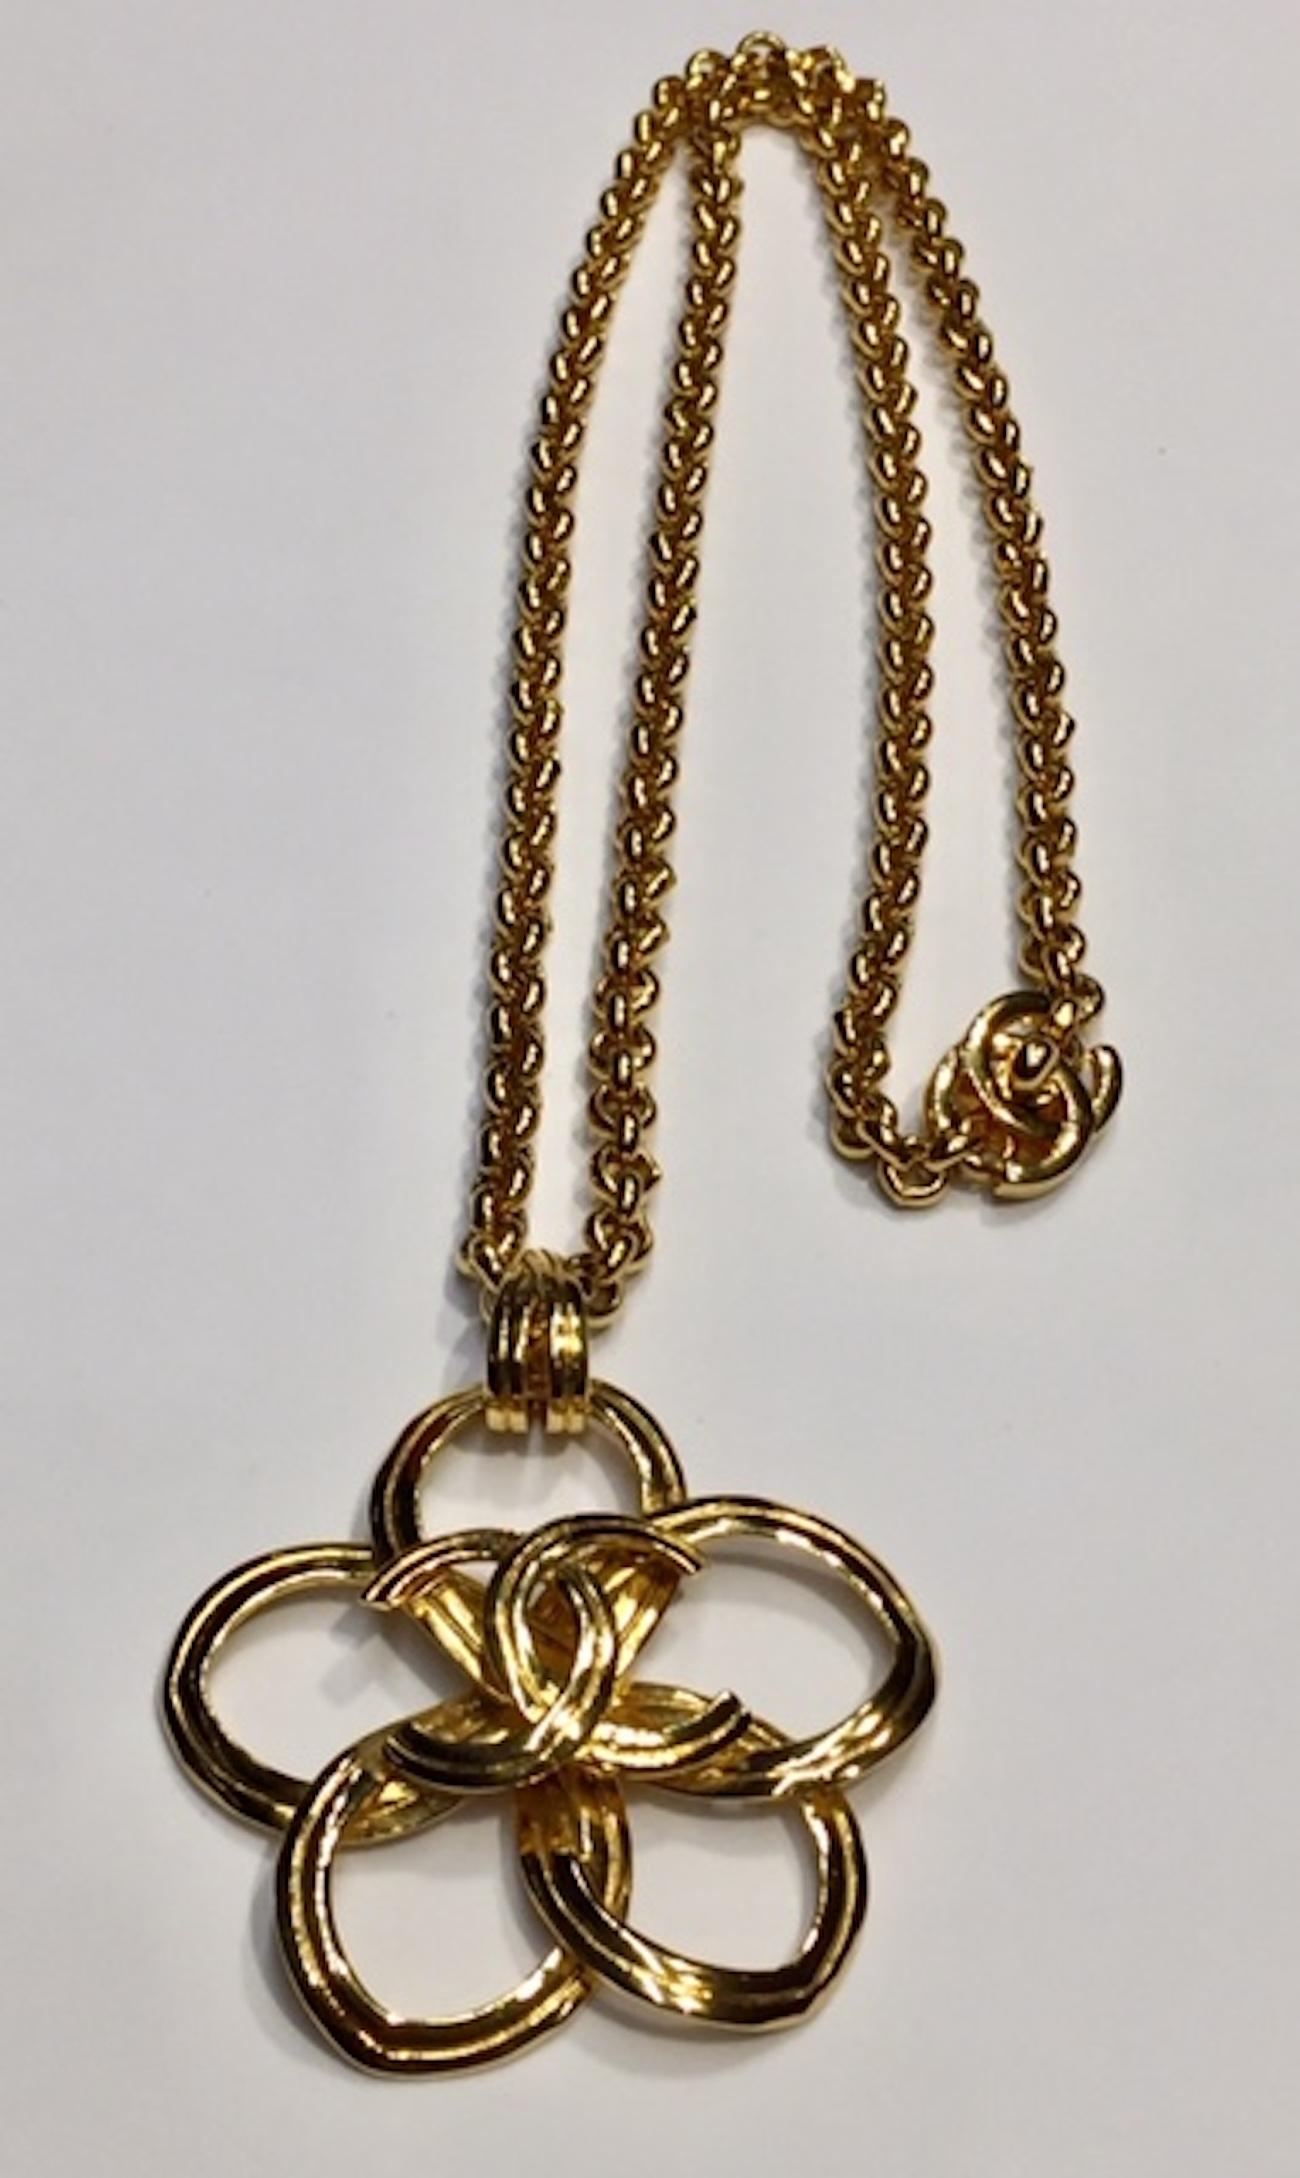 From the Spring 1996 collection is this lovely Chanel large flower pendant necklace. The flower pendant measures 2 5/8